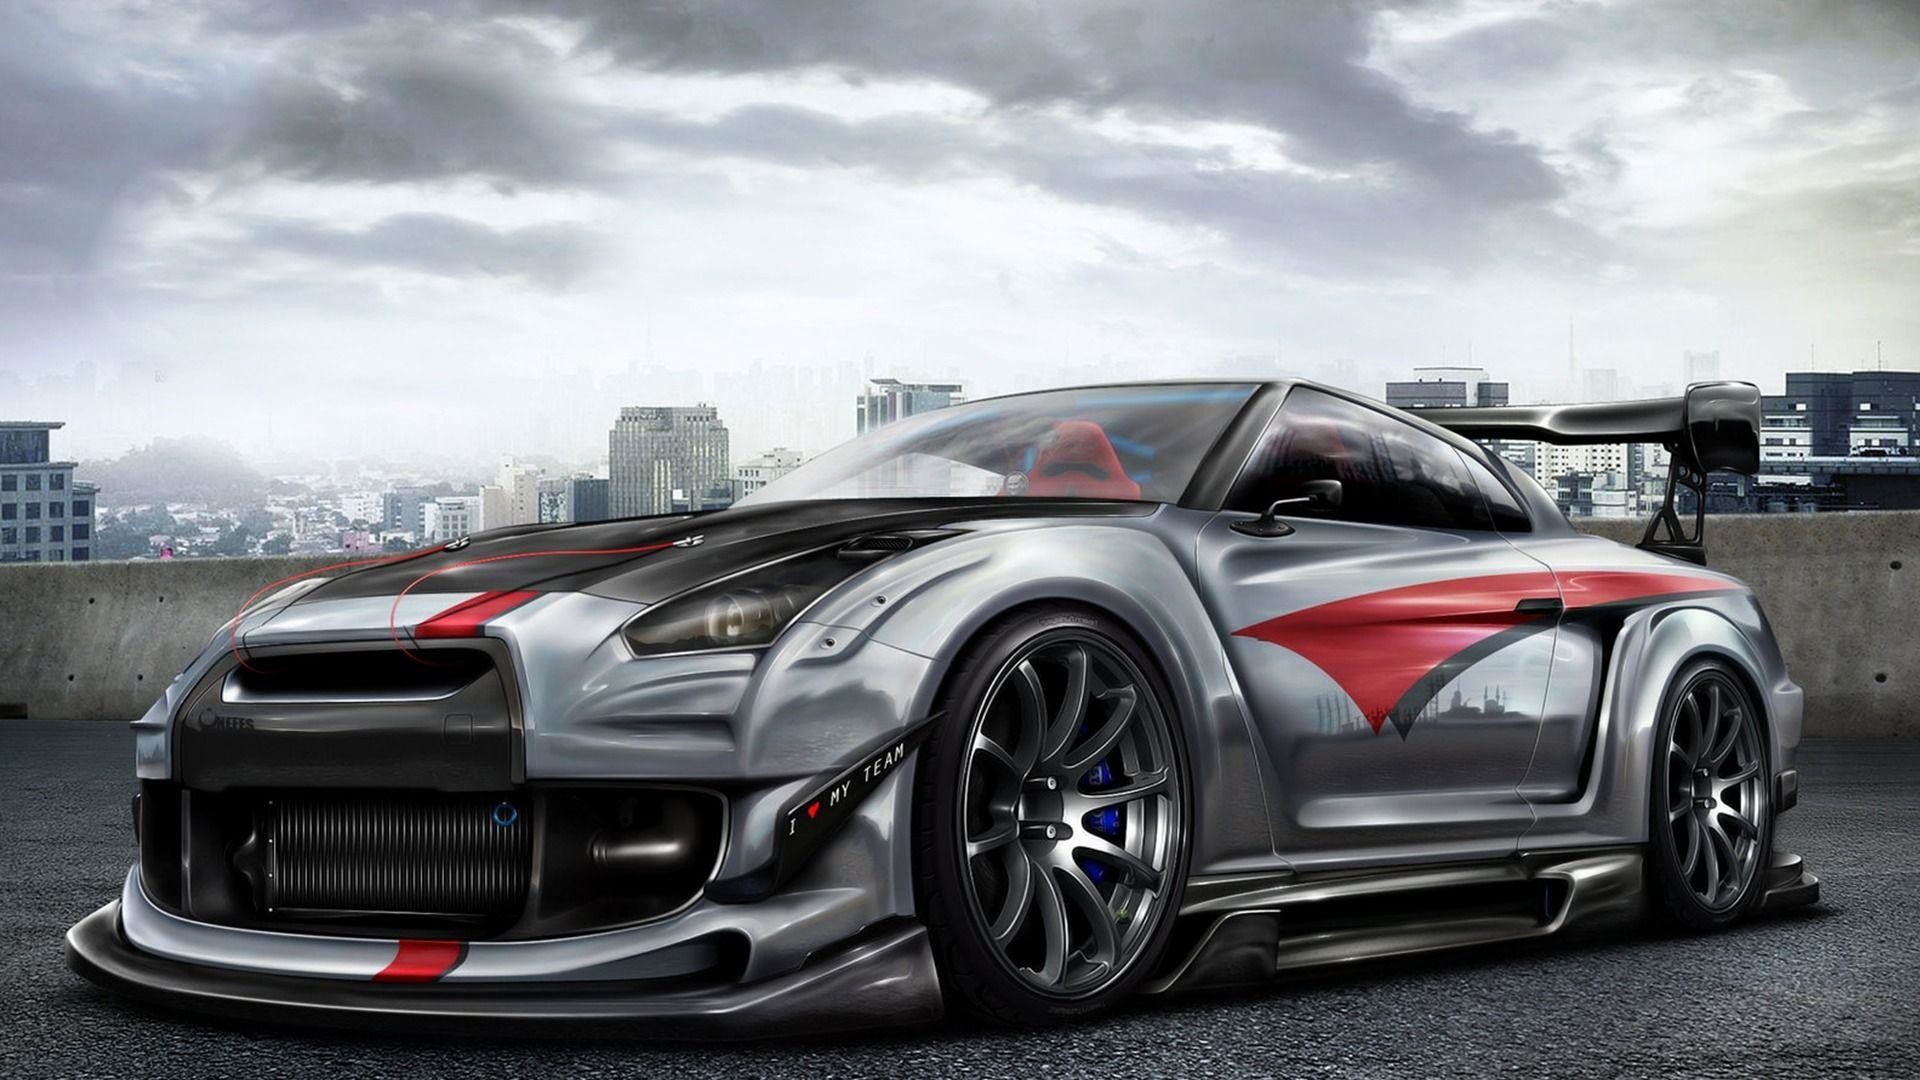 1920x1080 You searched for Nissan Skyline R35 - car auto gallerycar auto gallery